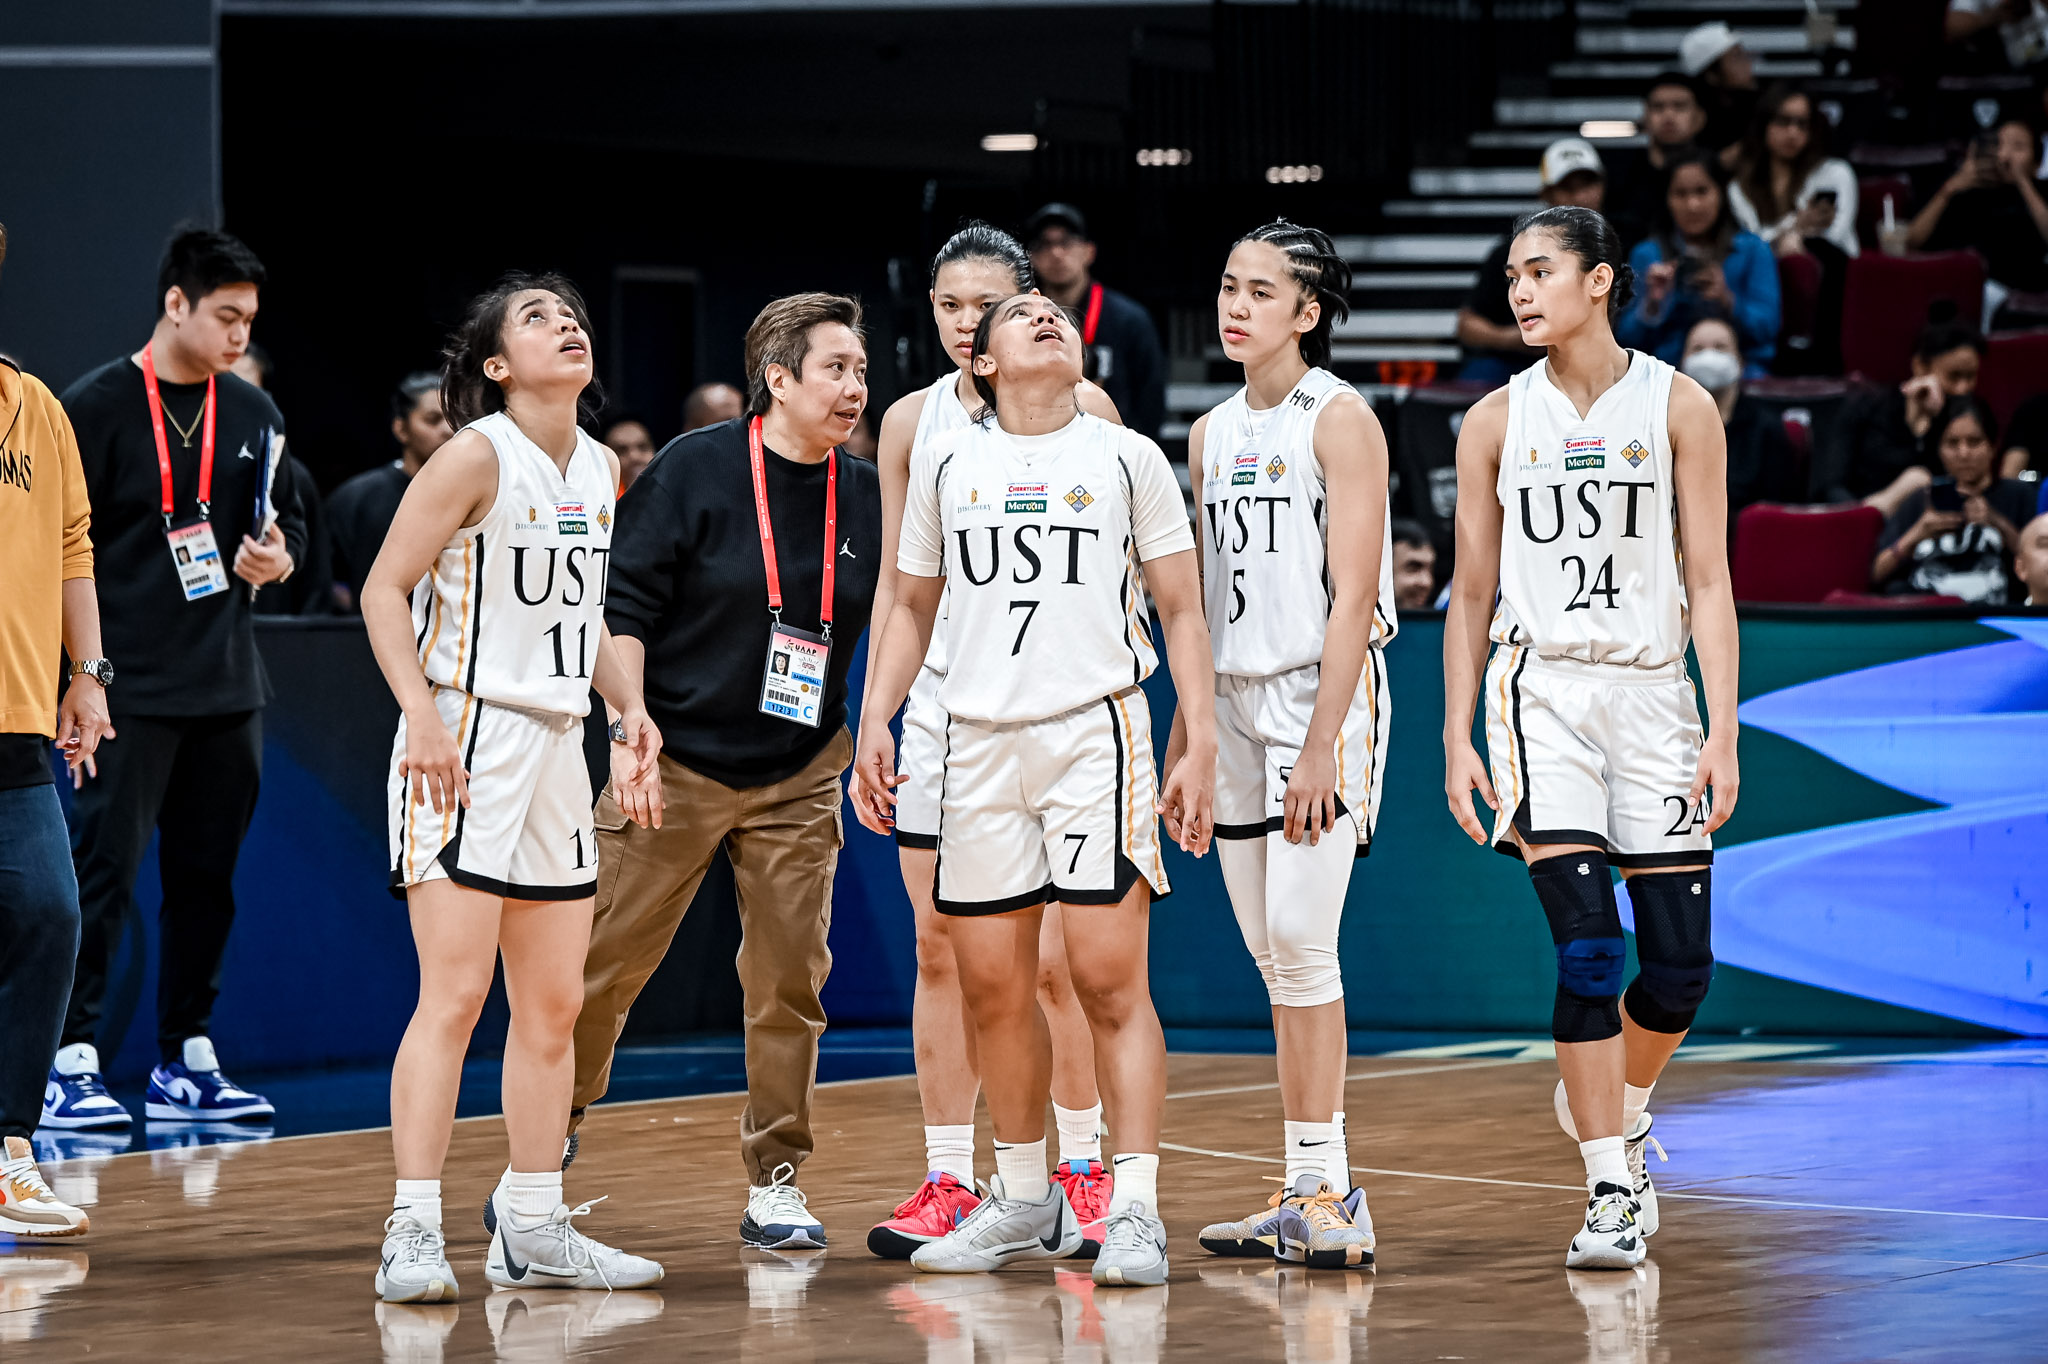 UAAP86-WBB-UST-vs-UP-UST-6602 UAAP 86 WBB: Ozar takes charge in OT as UP stages epic comeback vs UST, forces do-or-die Basketball News UAAP UP UST  - philippine sports news